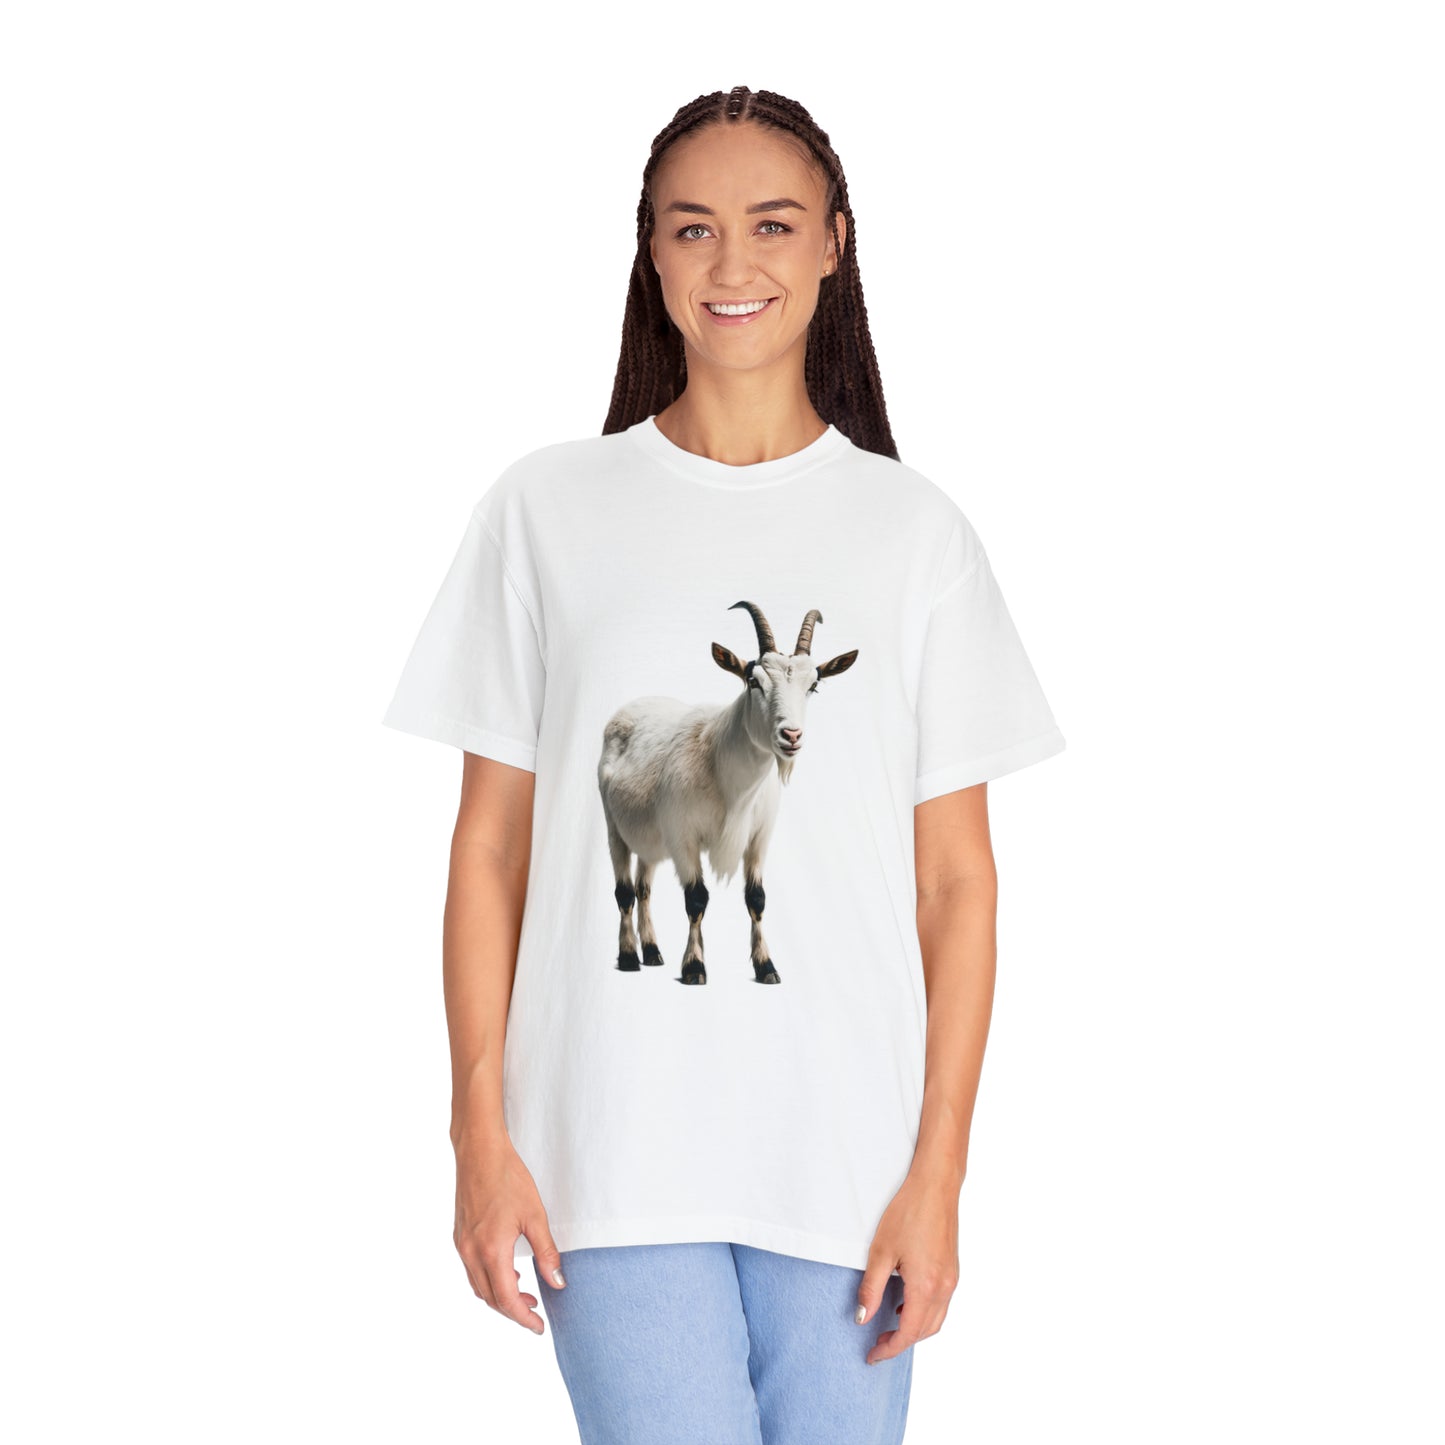 Greatest Of All Time (GOAT)T-Shirt